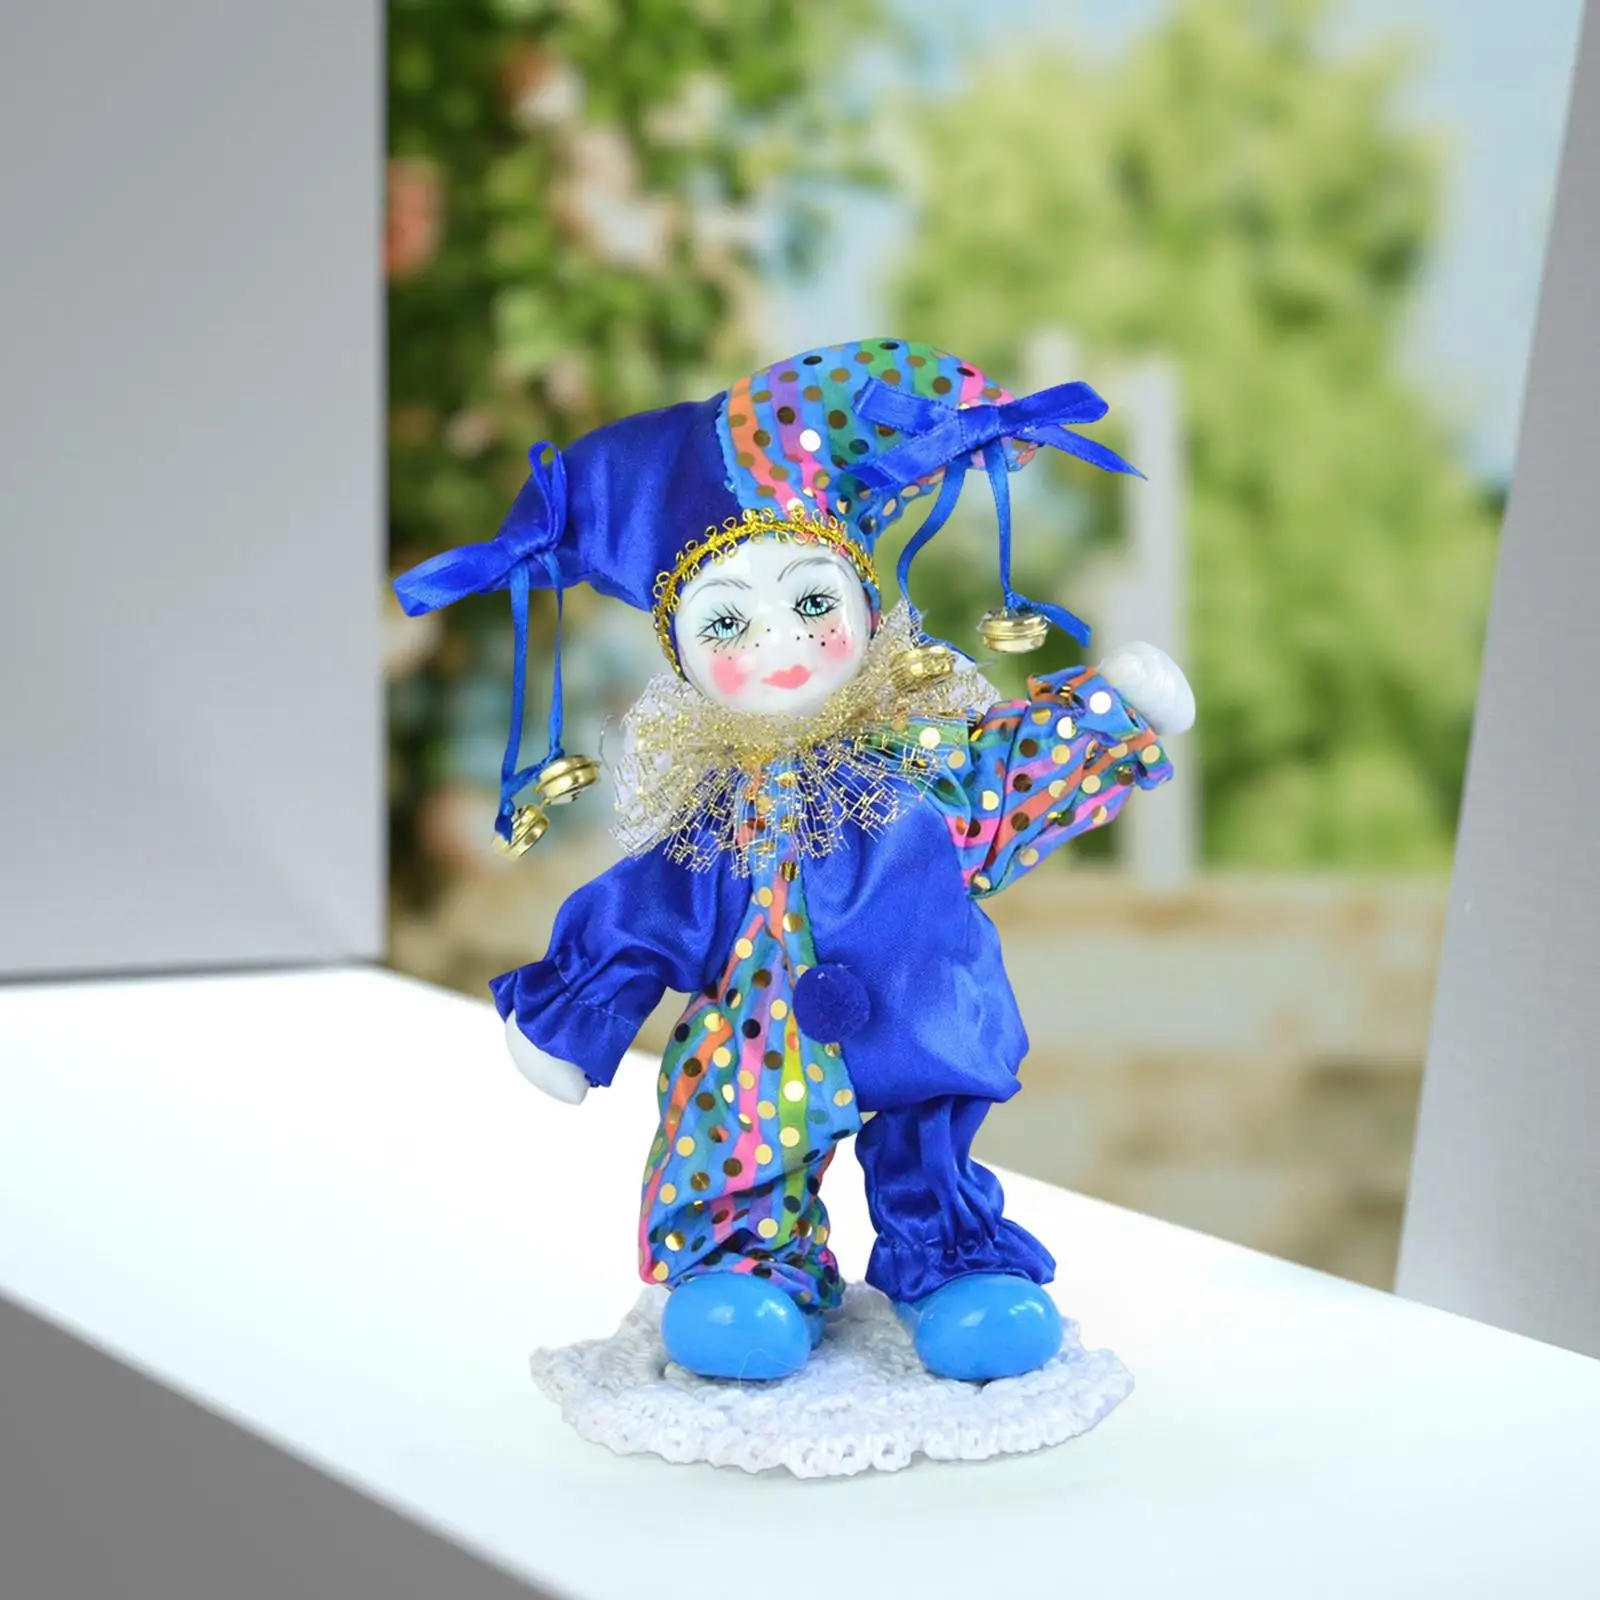 7inch Clown Doll Figurine ,Crafts ,Ornament ,Action Figures, Home Decoration for Holiday